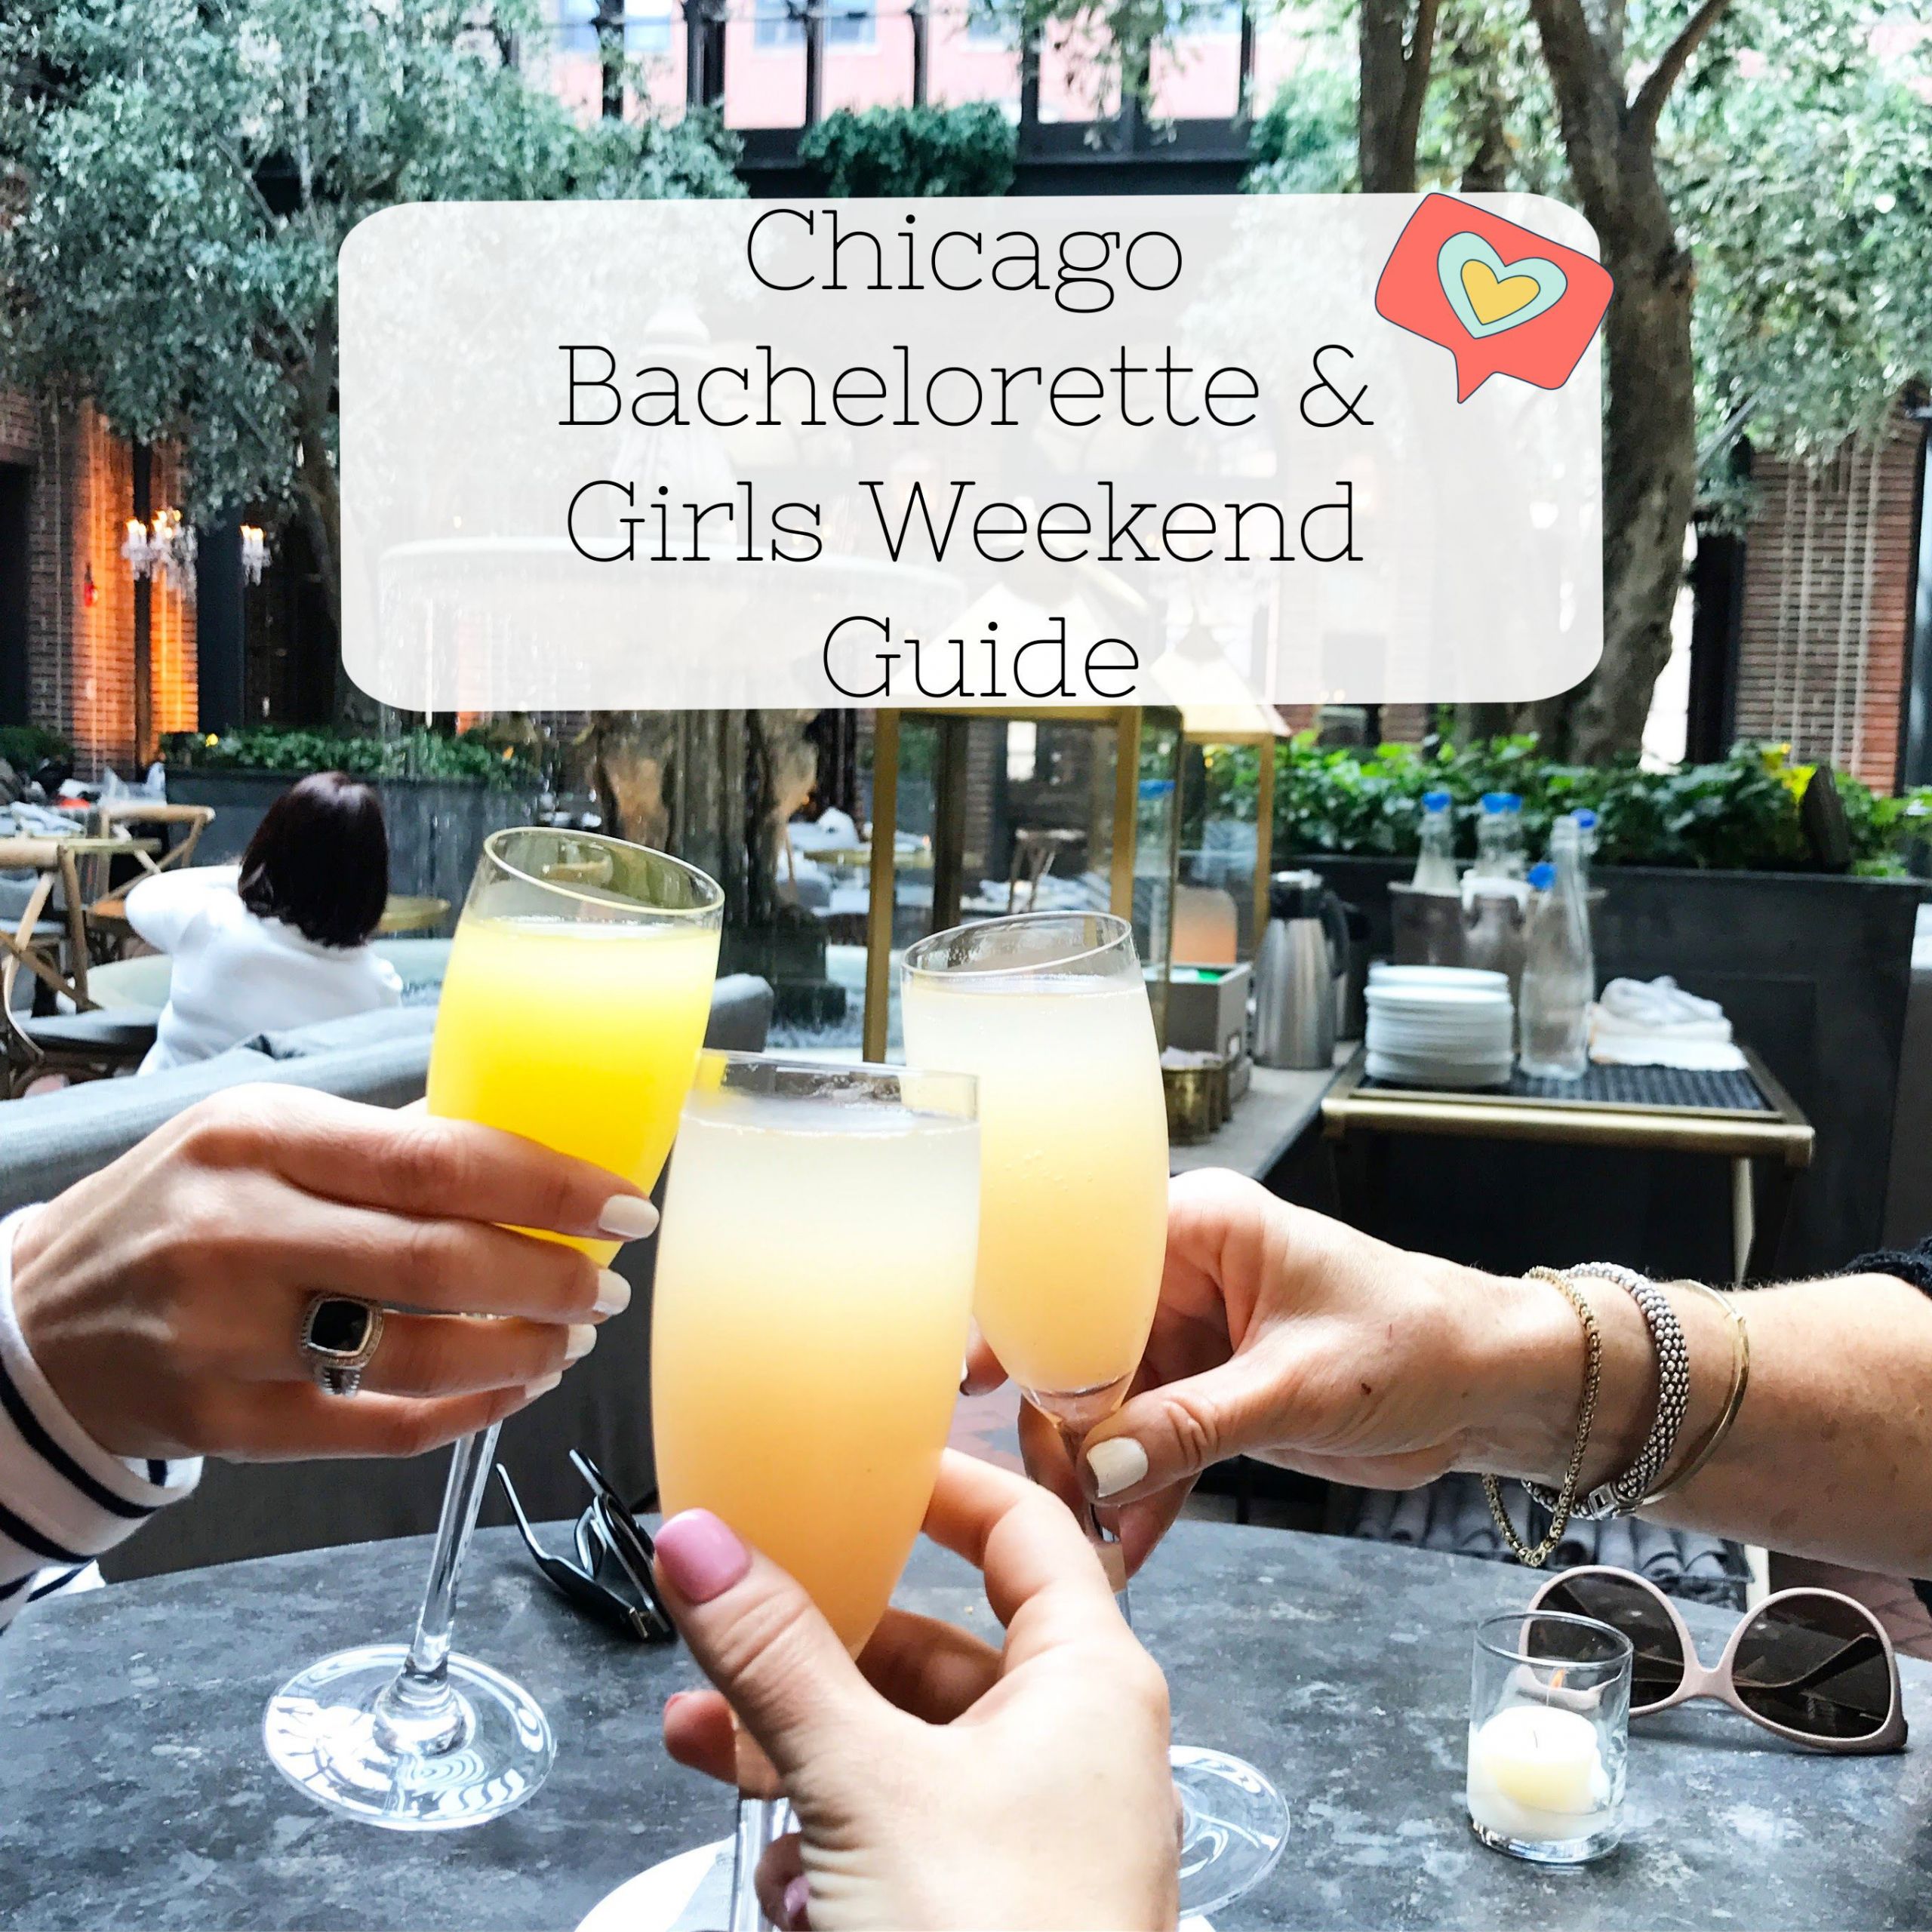 Bachelorette Party Ideas In Chicago Il
 Chicago Bachelorette & Girls Weekend Guide